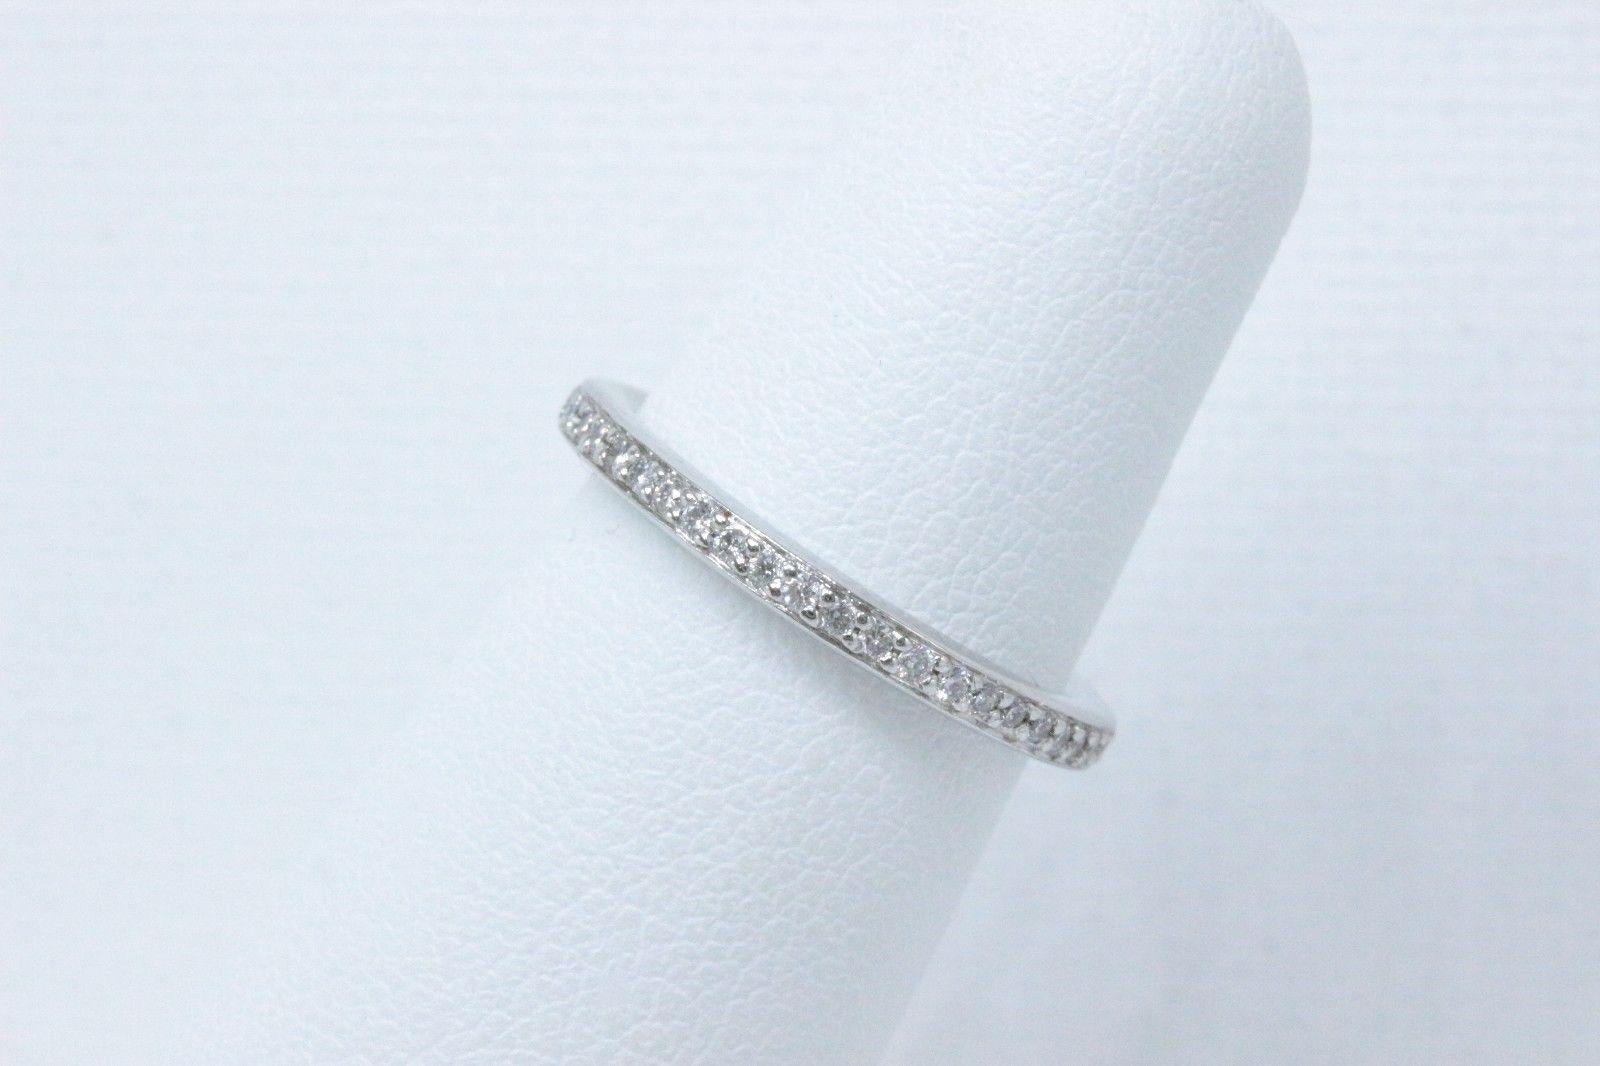 Ritani Eternity Diamond Wedding Band Ring Micro Pave Set in Platinum In Excellent Condition For Sale In San Diego, CA